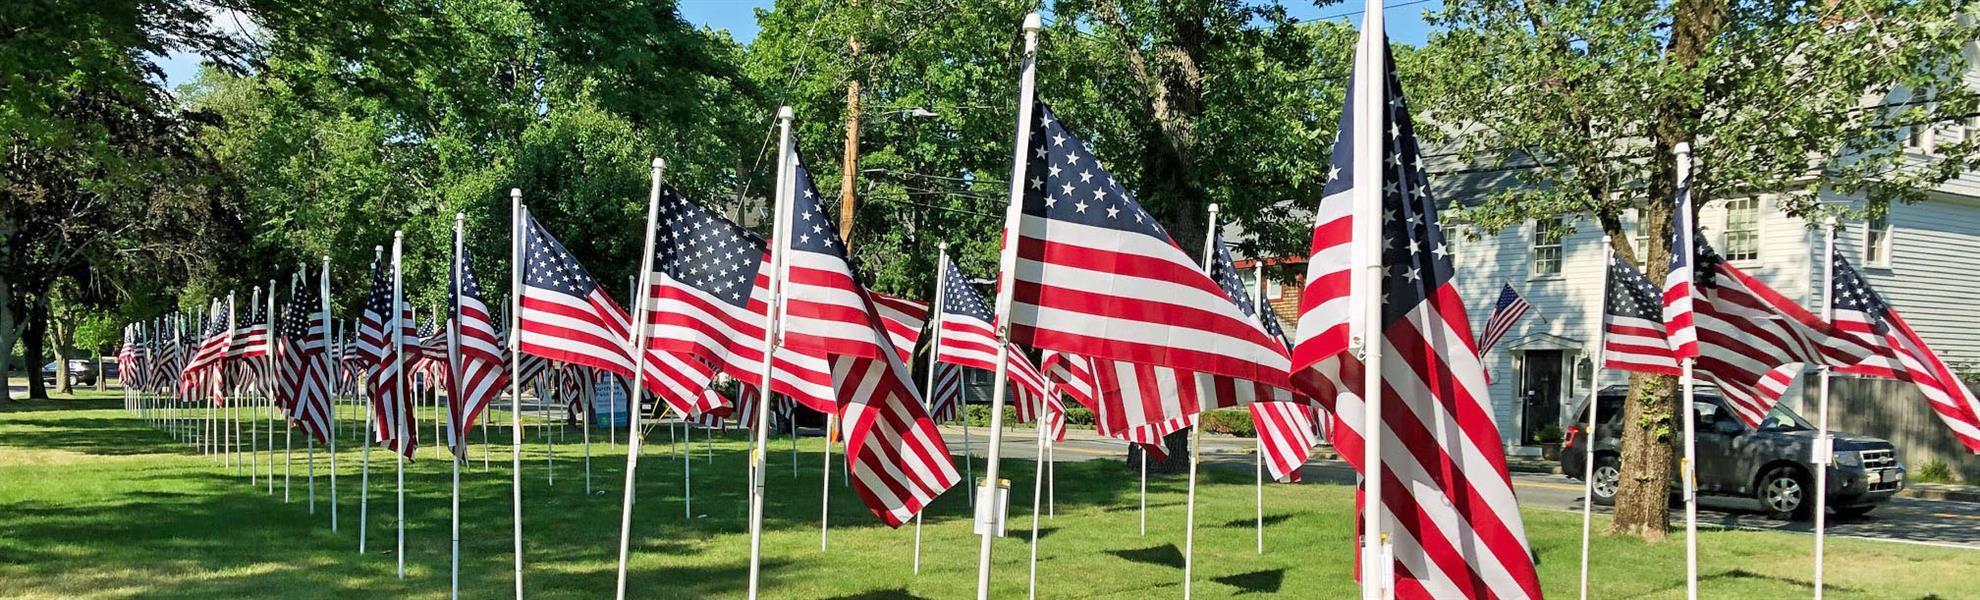 'Flags for Heroes' Ipswich - June 10-July 9, 2023